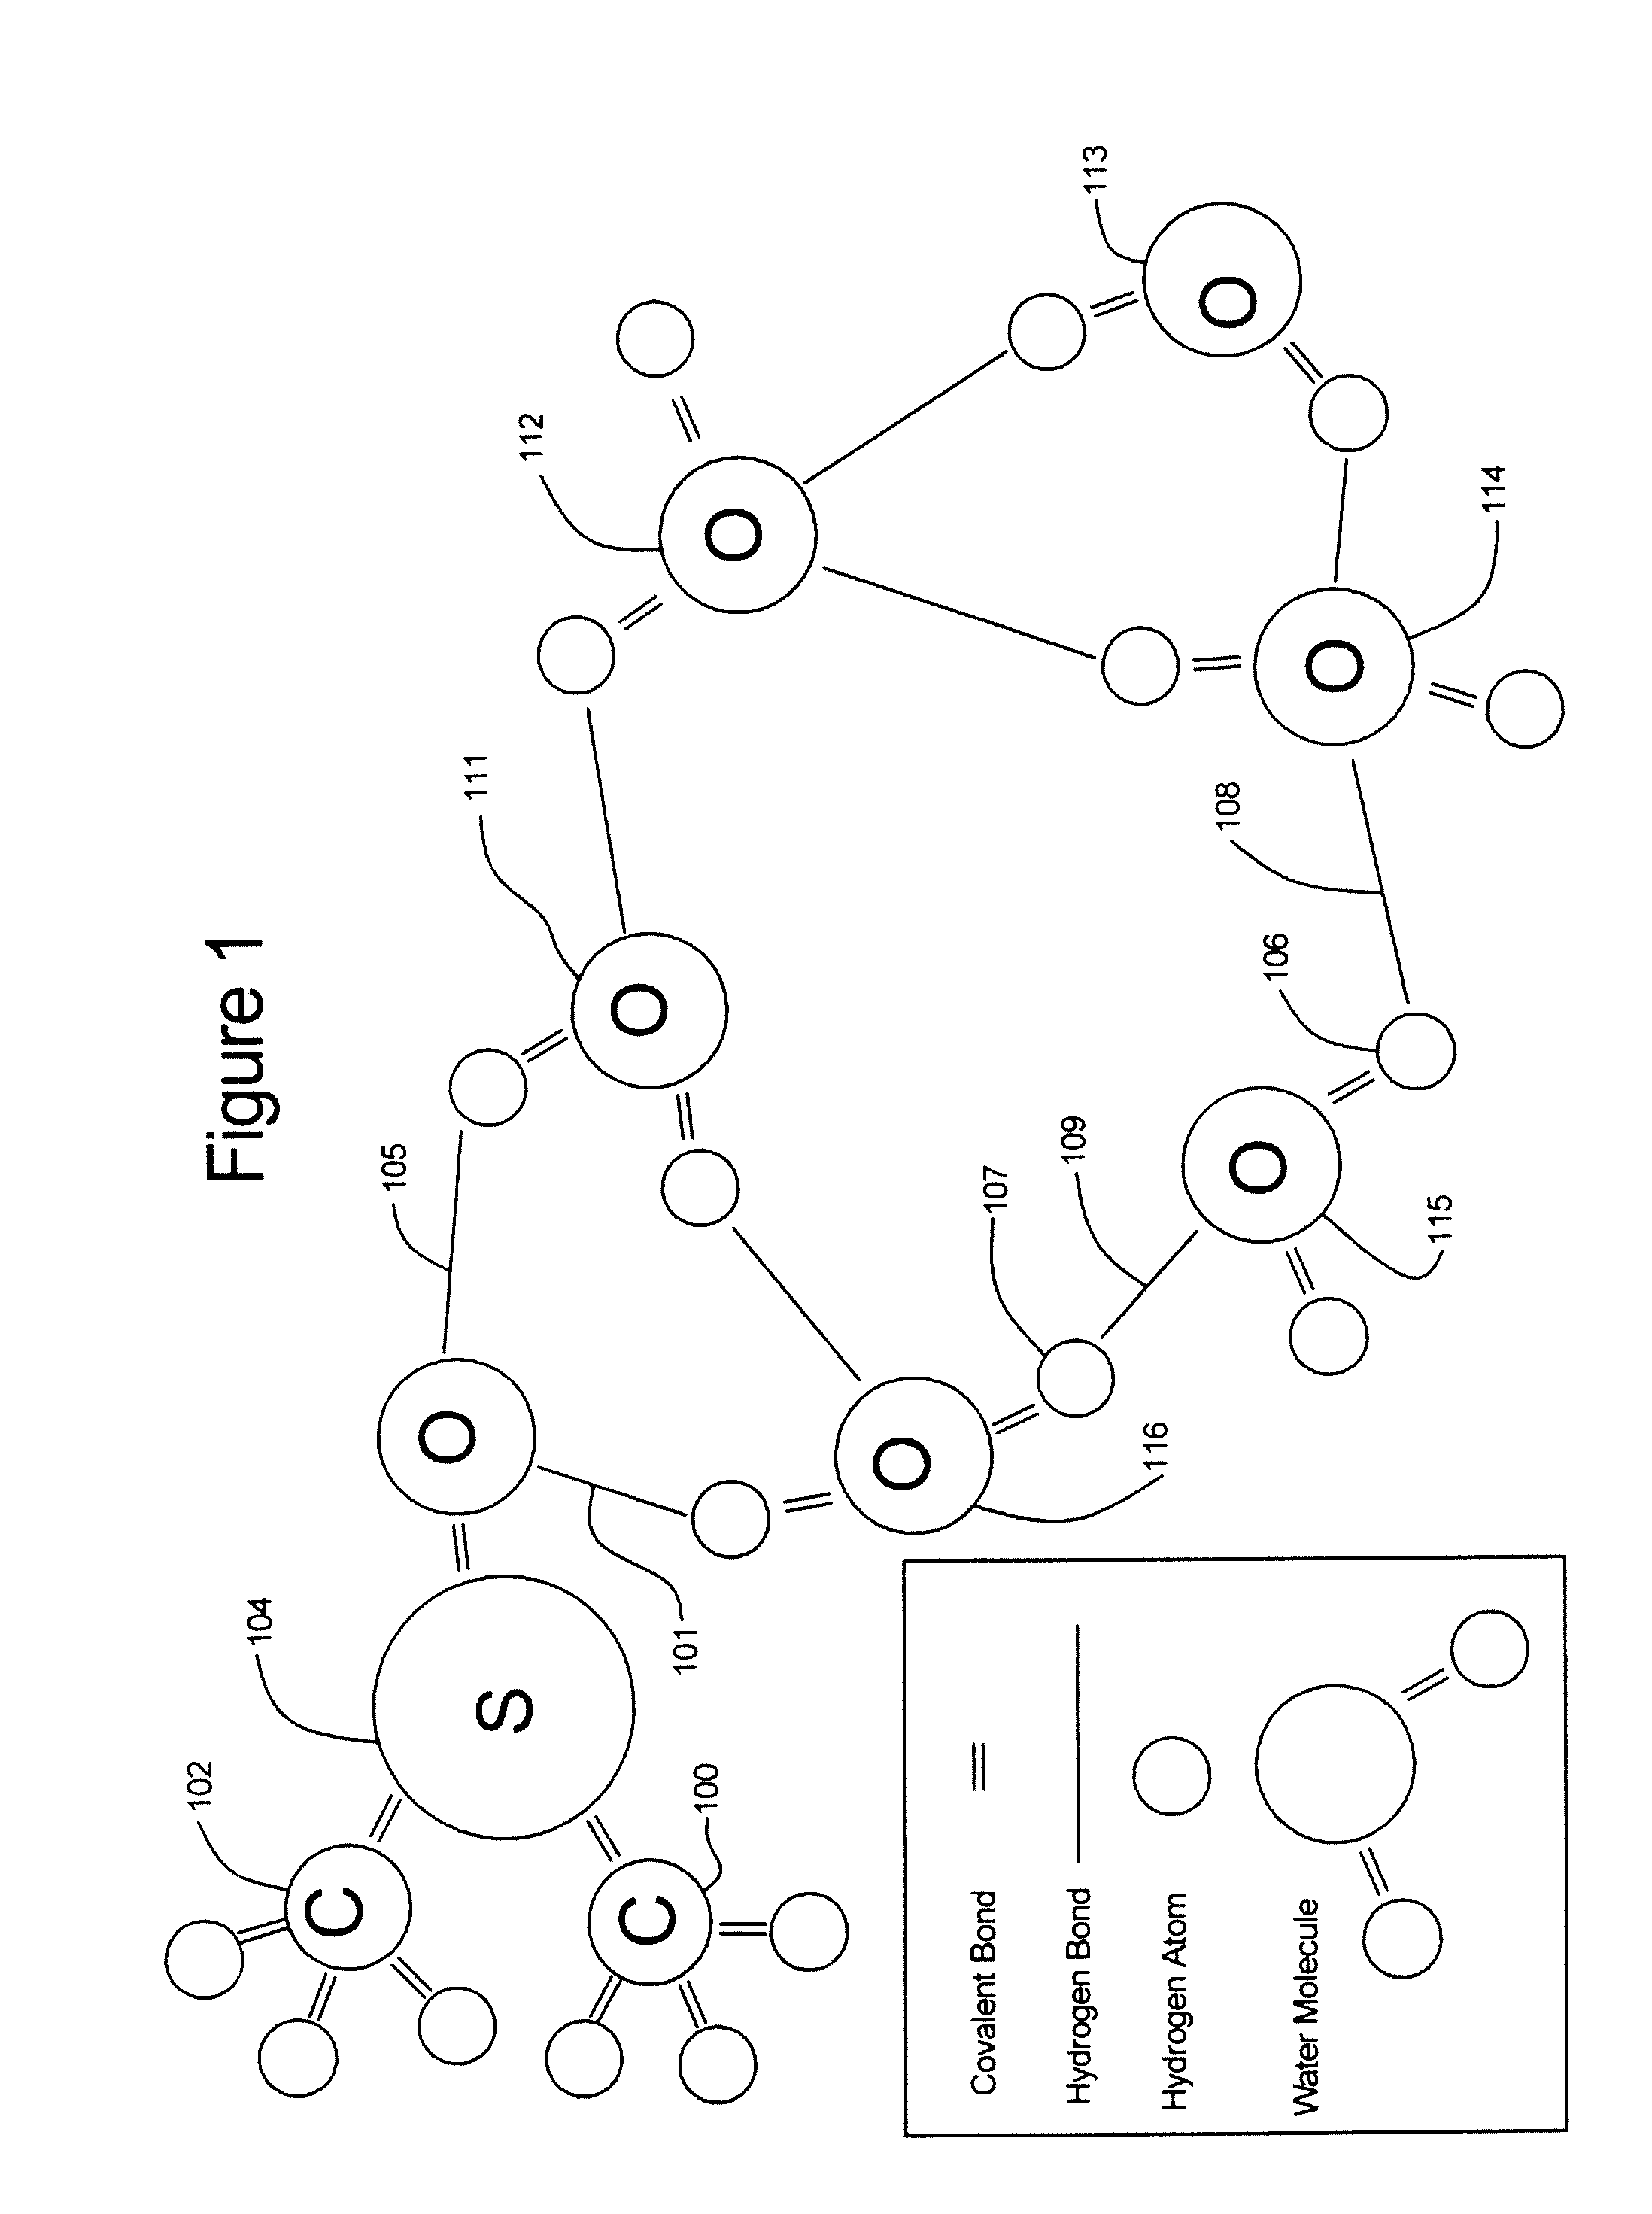 System and method for repulping of paper products and improvement of water quality with dipolar solvents and recovery